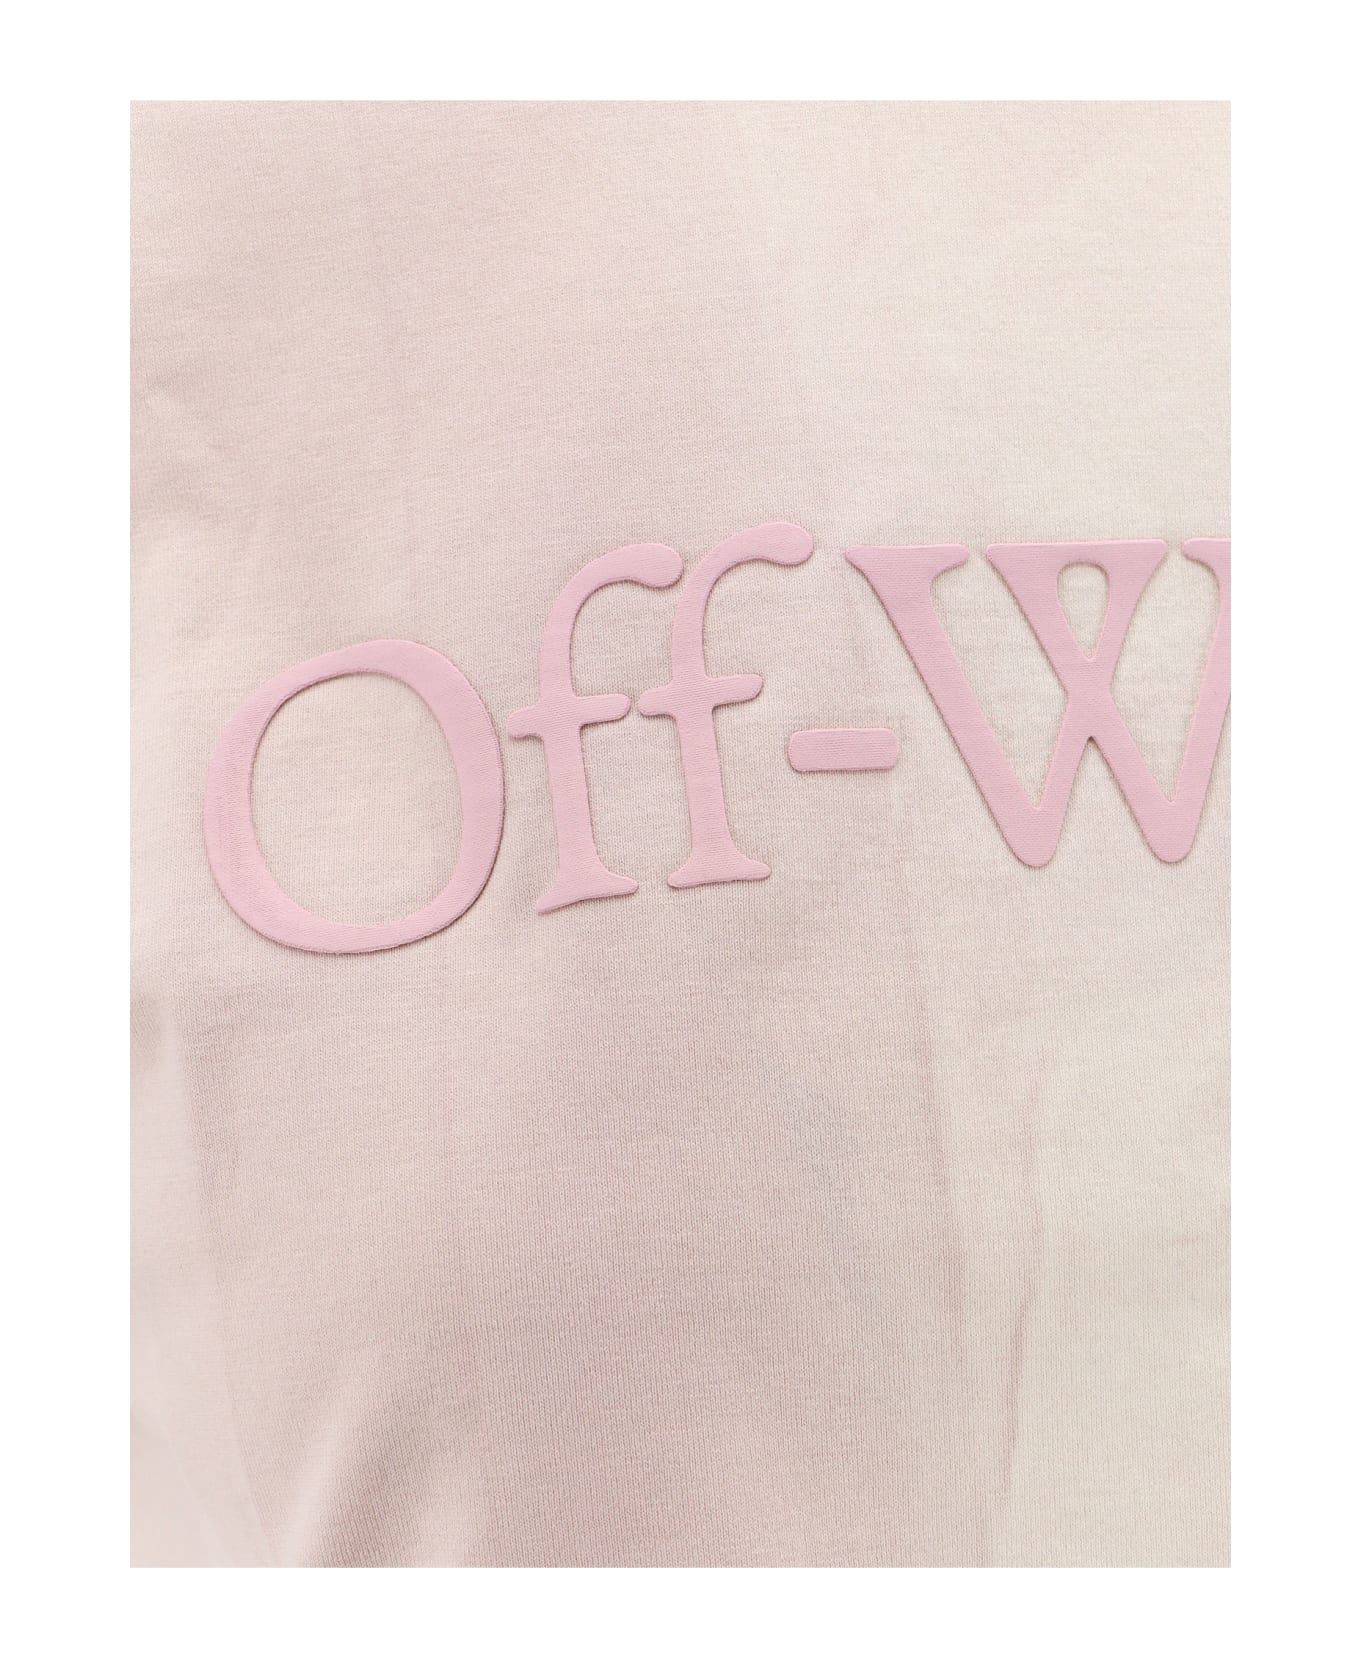 Off-White Laundry Cropped T-shirt - Pink Tシャツ